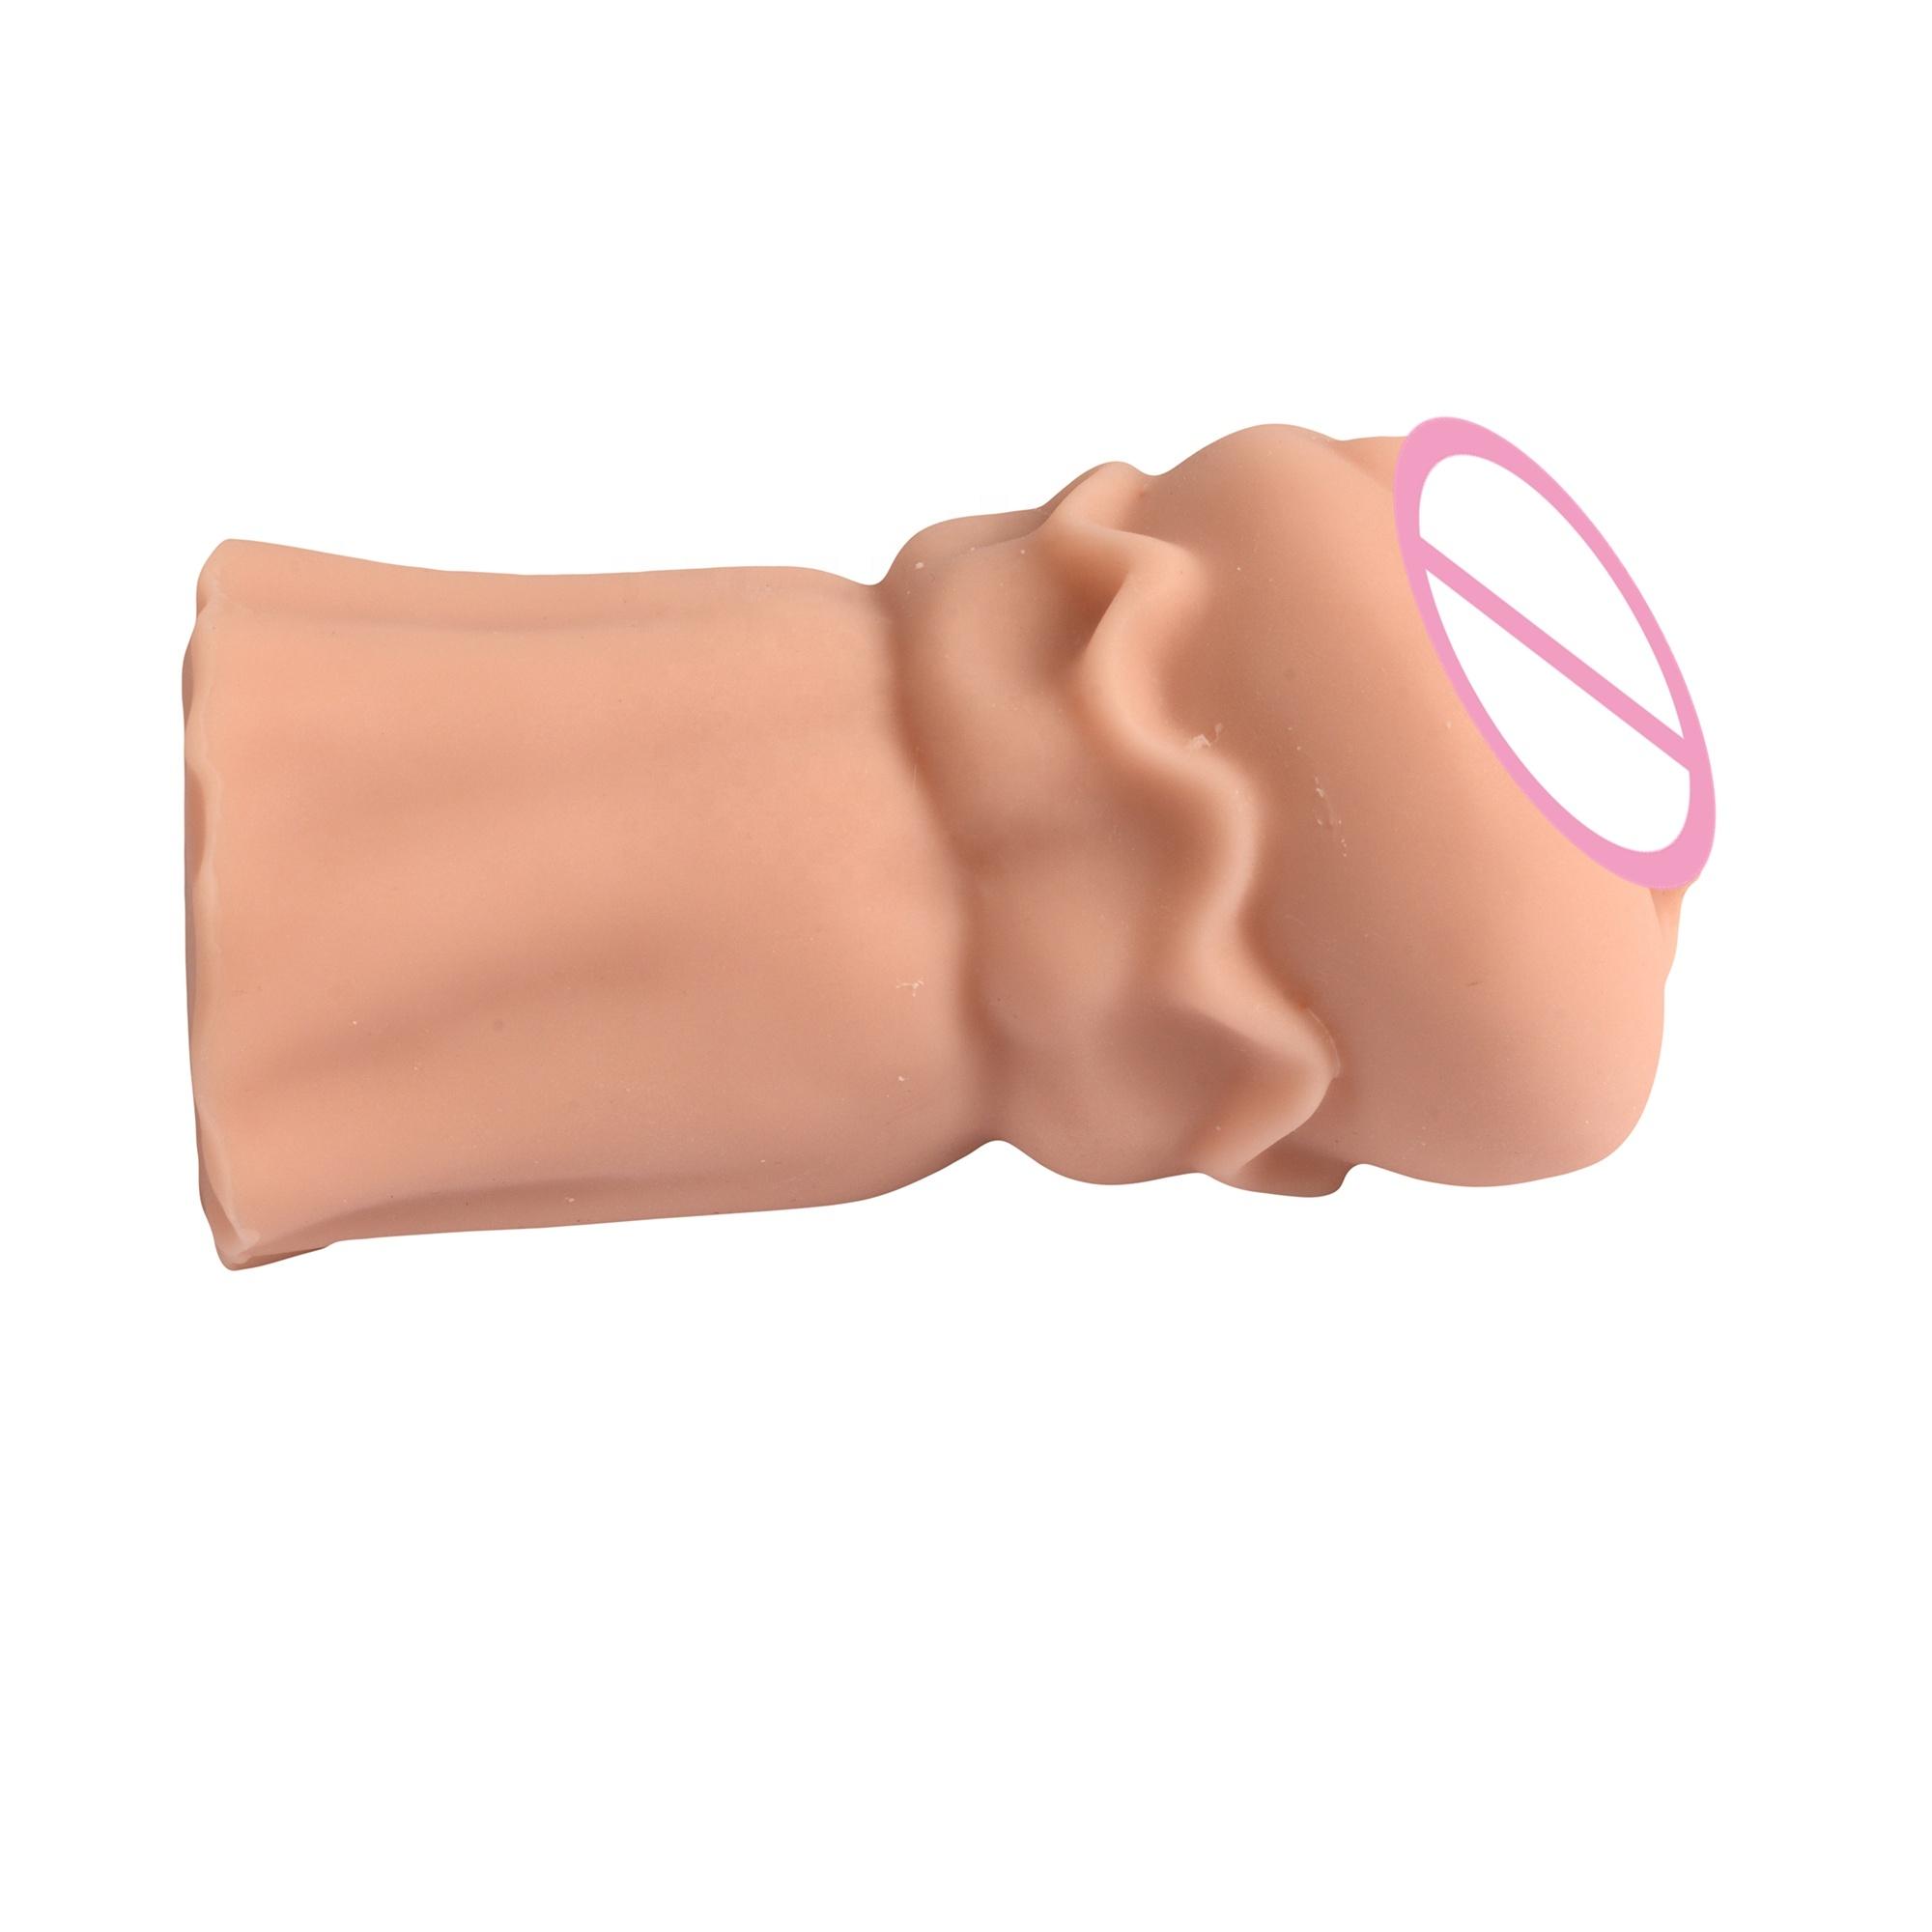  Sex Doll Masturbator With Textured Tight Anus And Mouth Vagina Deep Throat Soft Mini Realistic Real Adult Sex Toys For Men